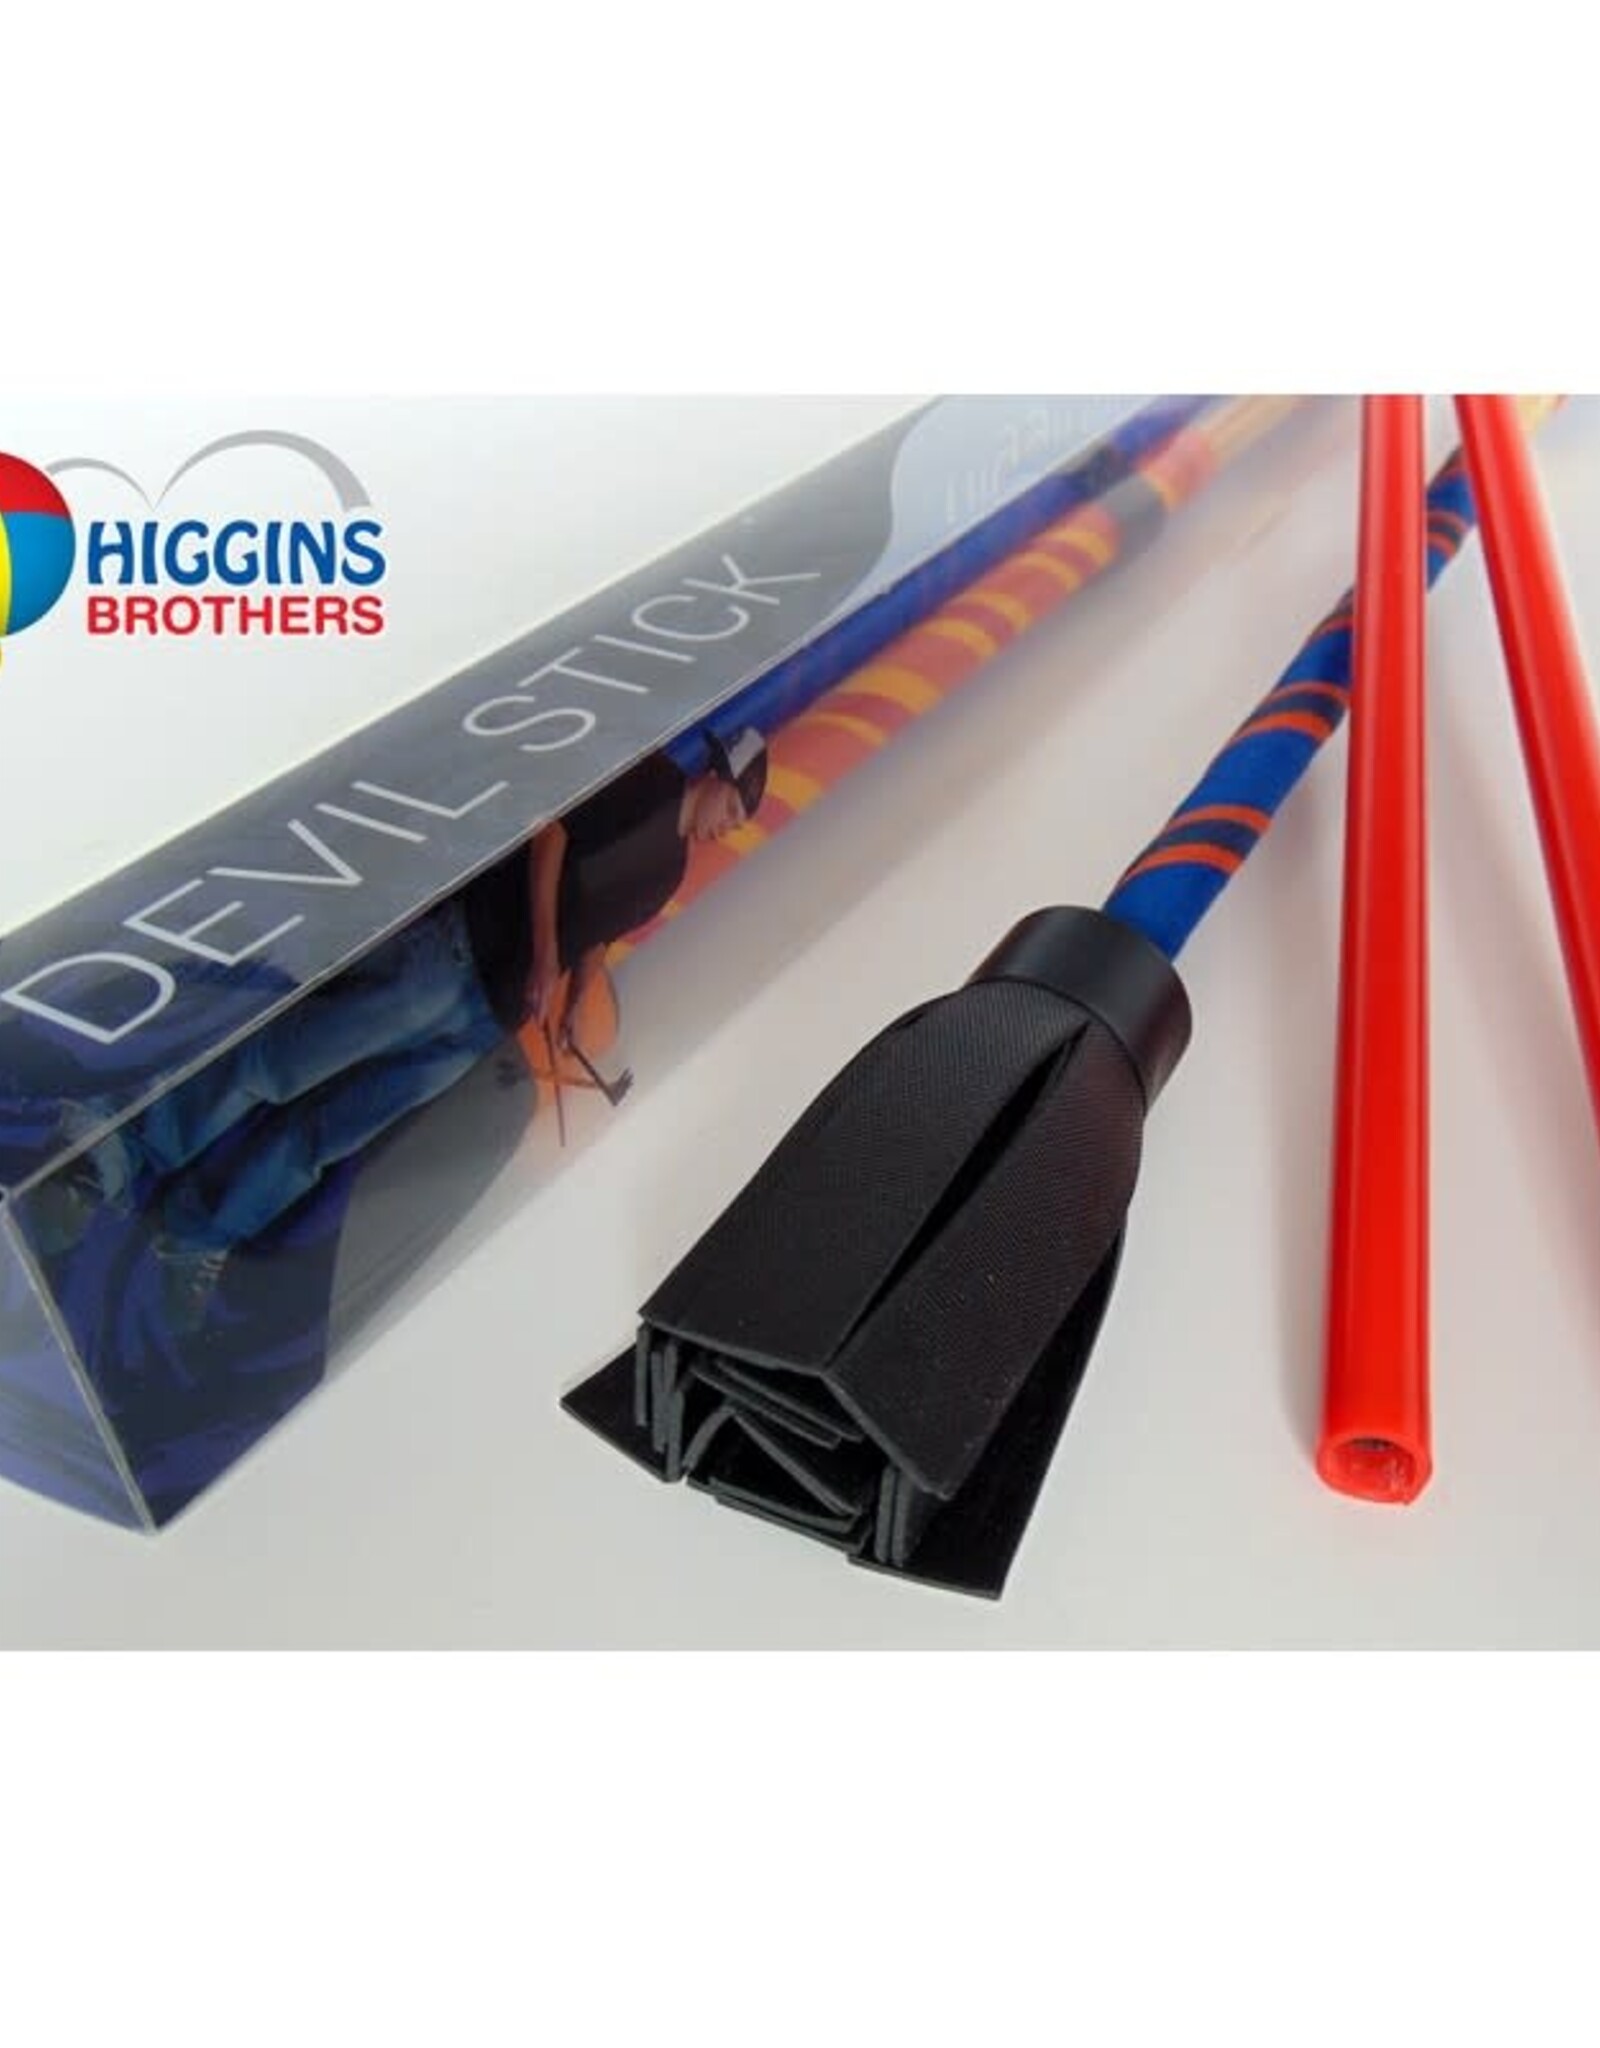 Higgin's Bros Inc. Flowerstick in Box (Devil Sticks) *Not available for shipping. Pick up only.